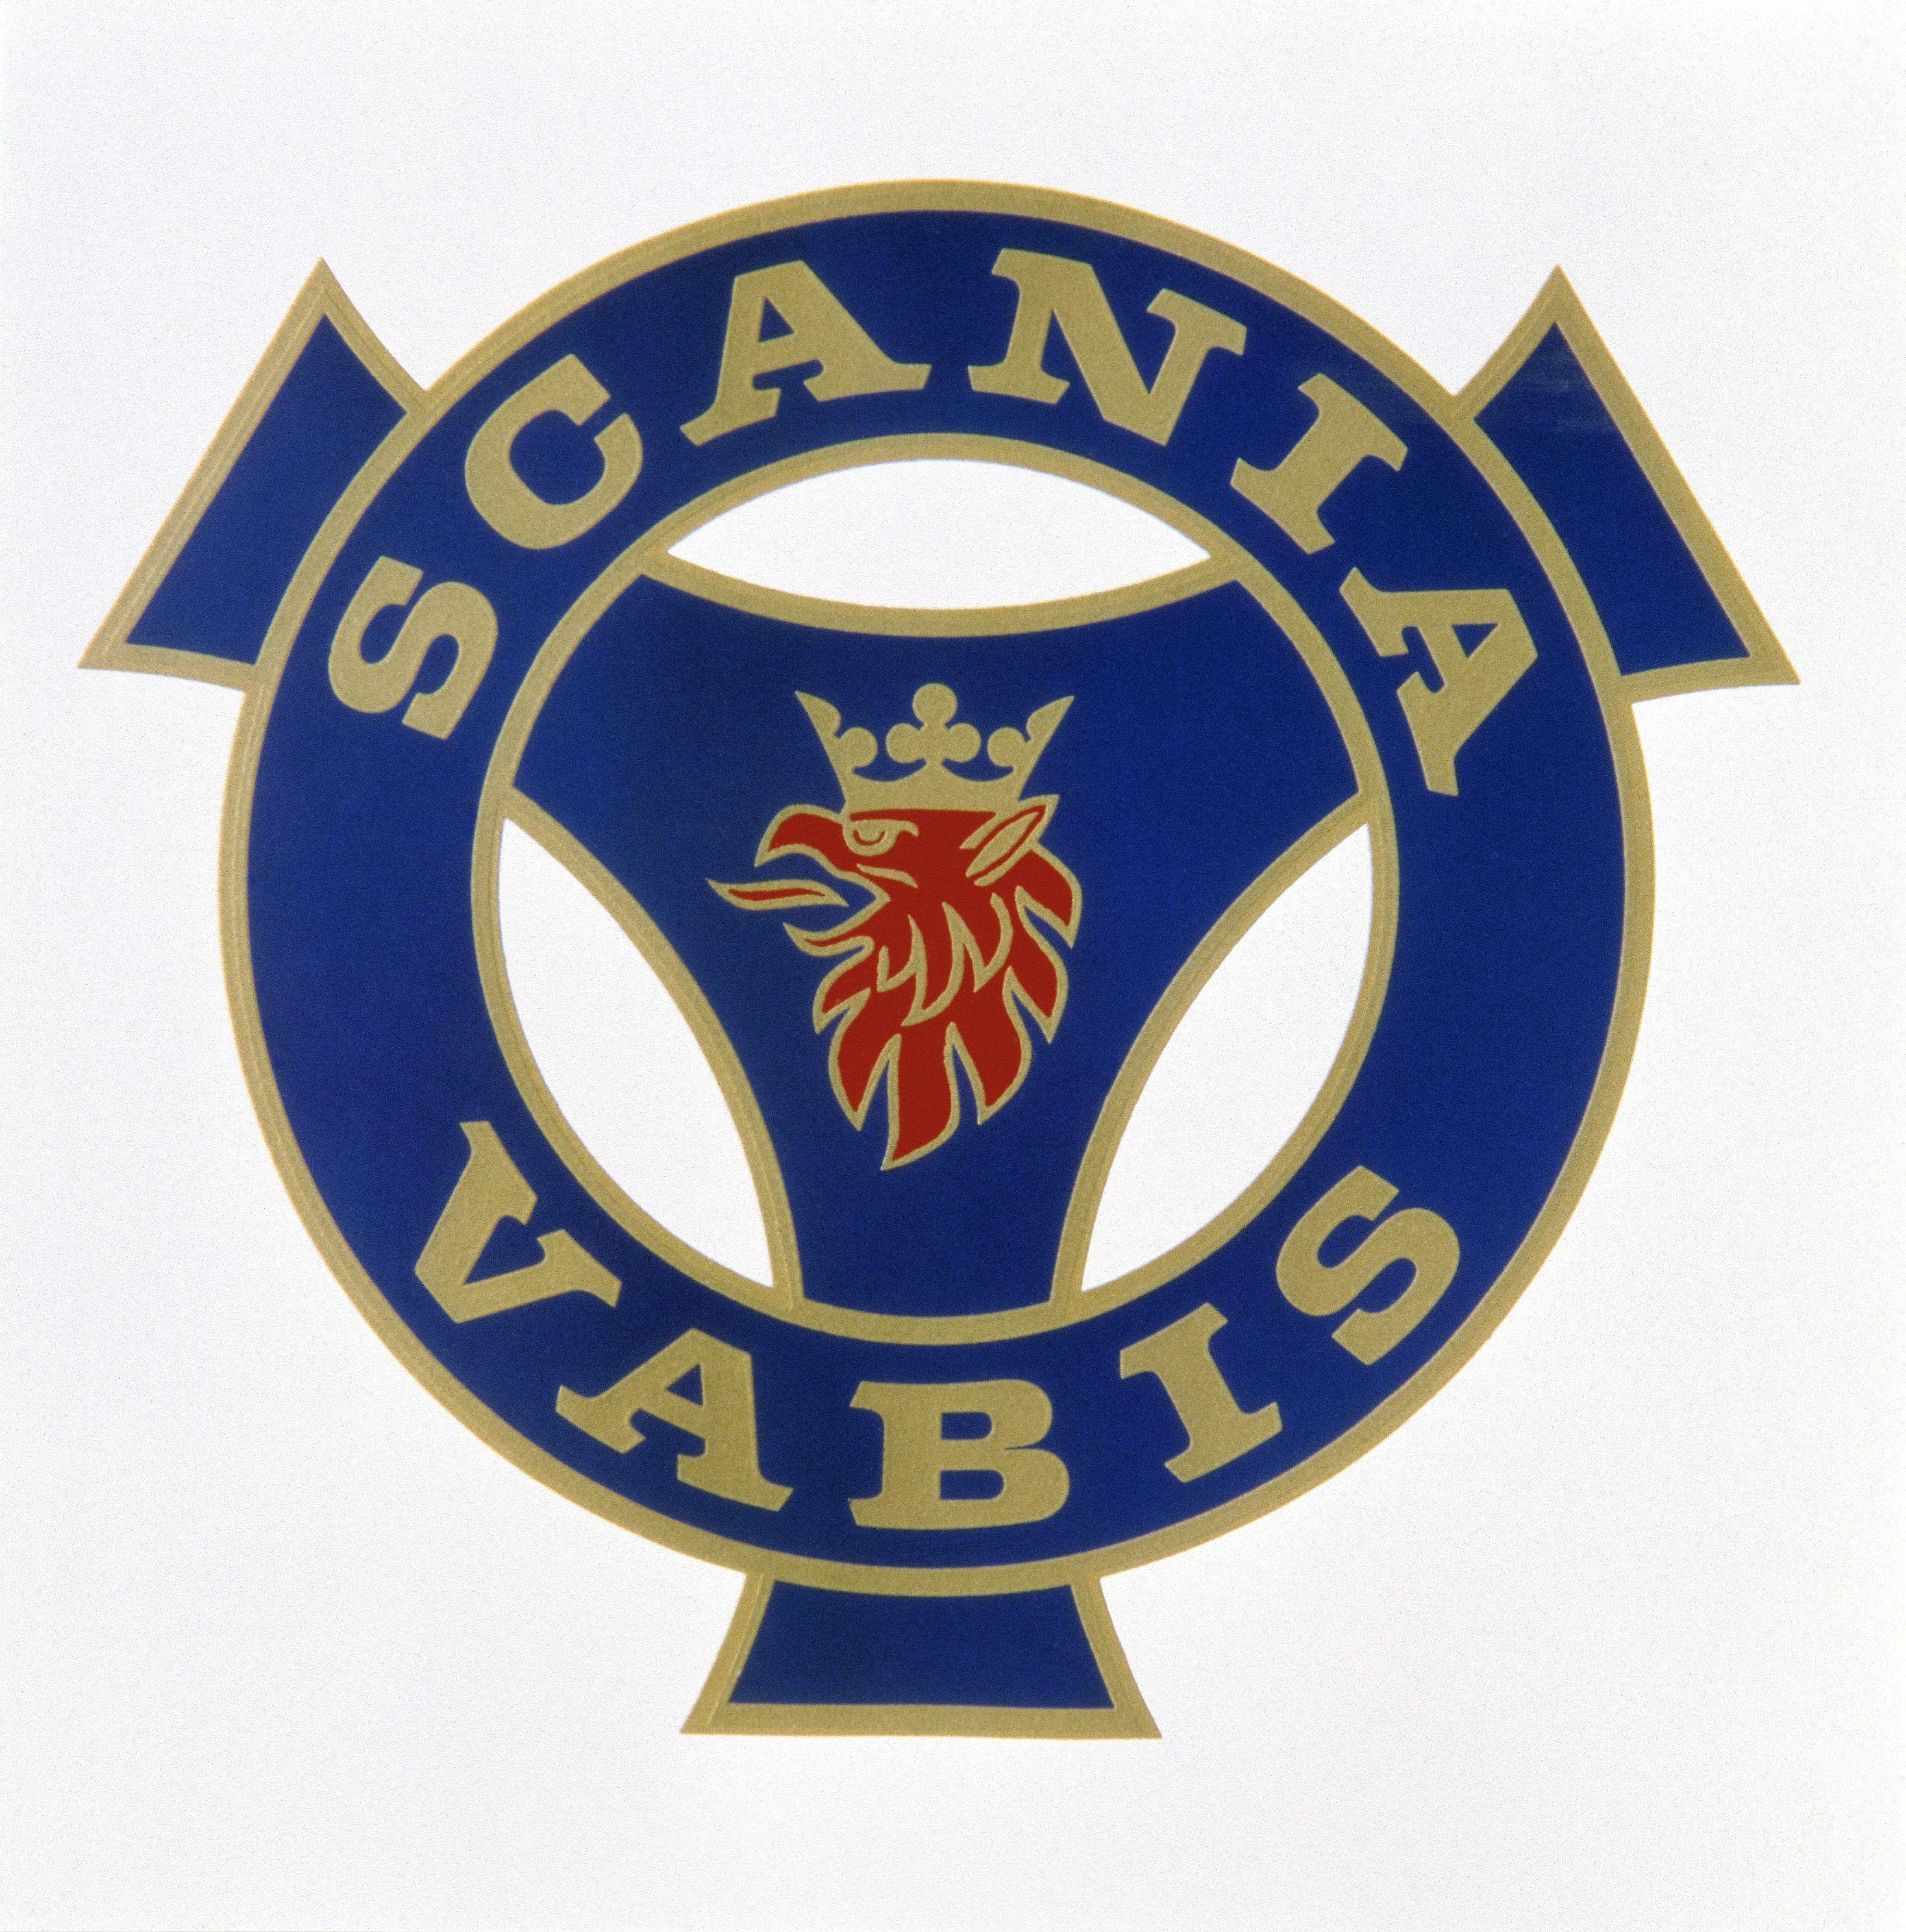 Scania Logo - Scania watches over its trademark